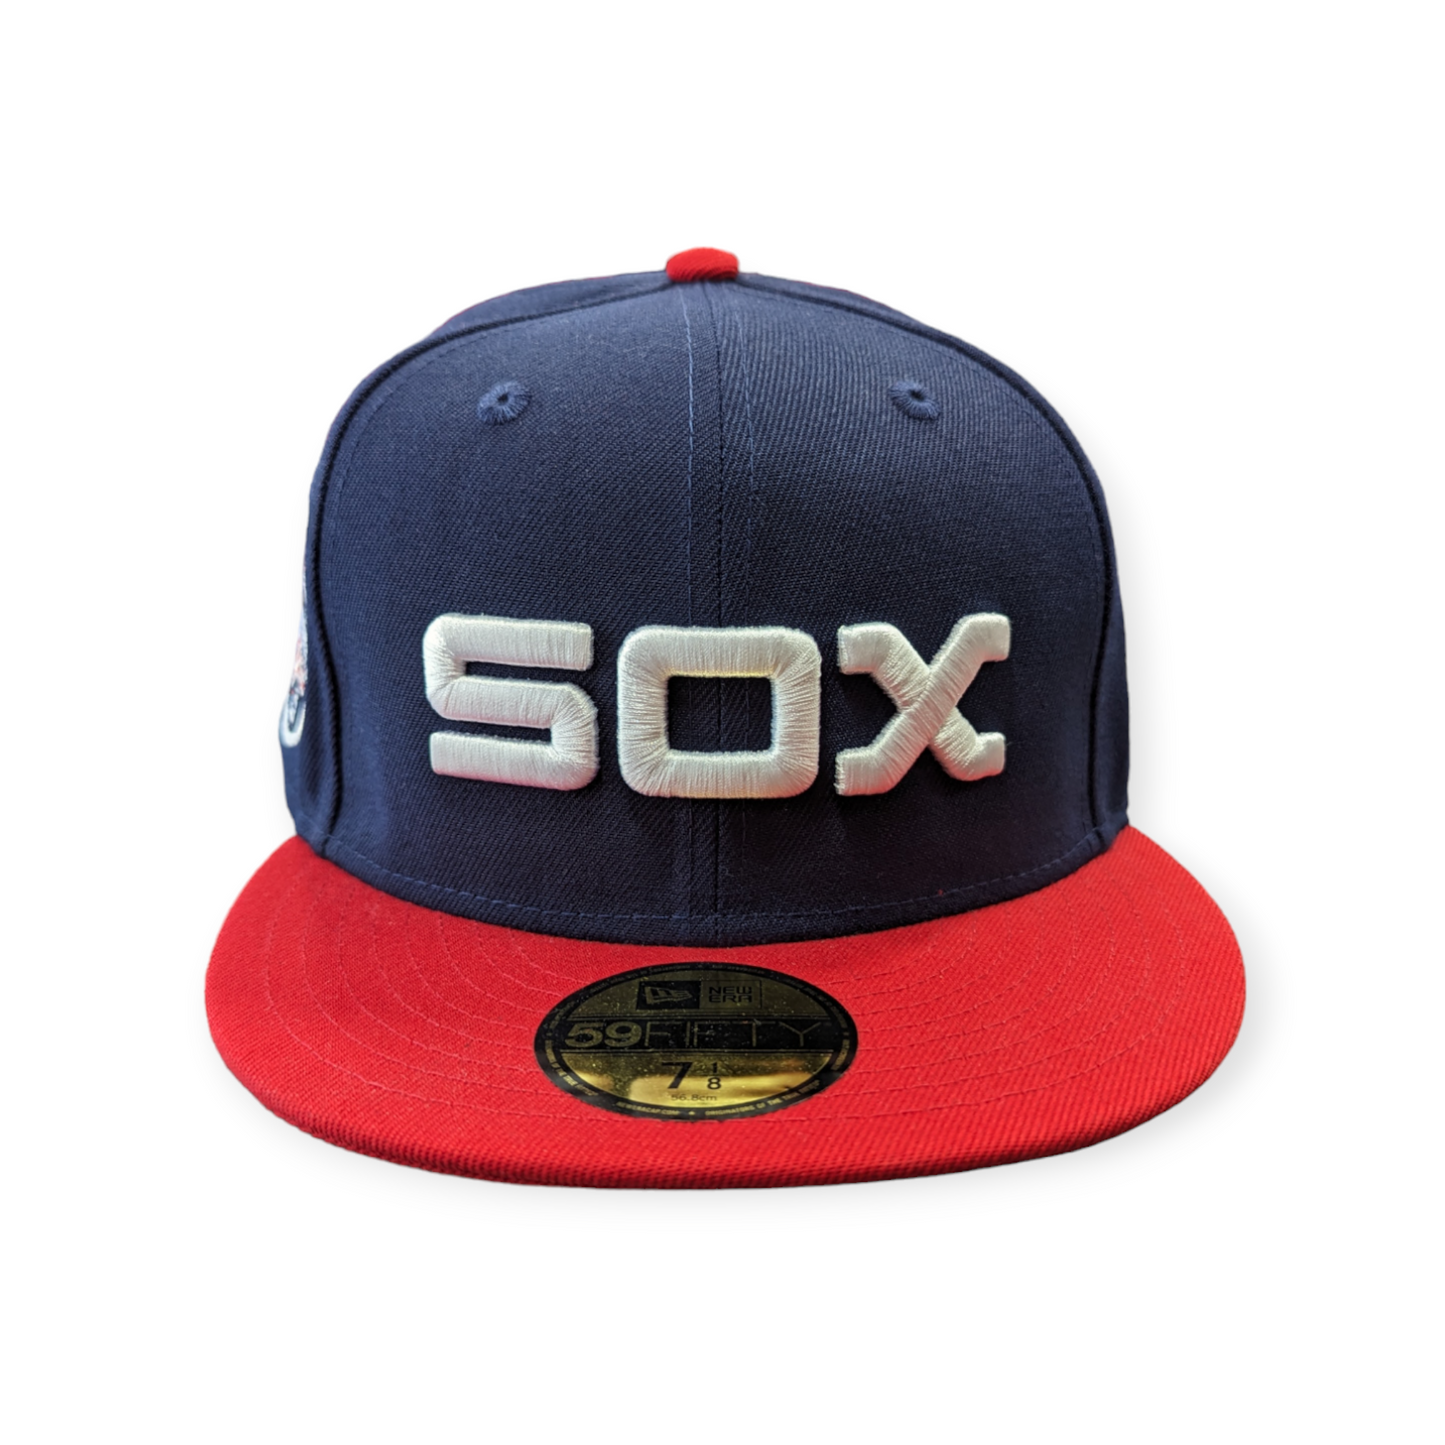 Chicago White Sox 1983 Road 75 Years Navy/Red New Era 59FIFTY Fitted Hat